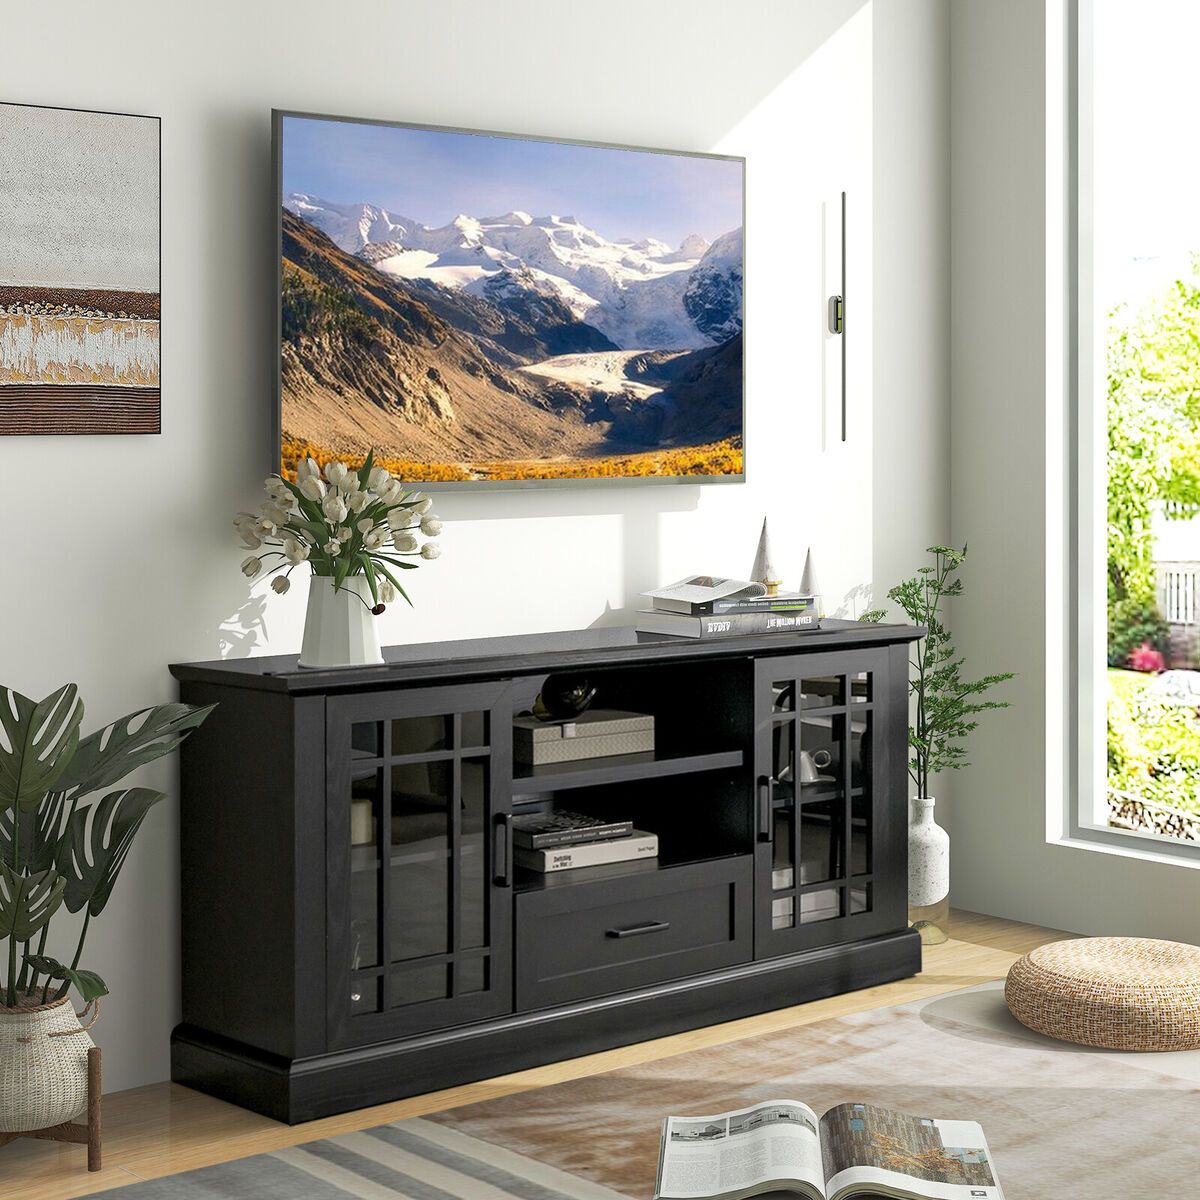 Multi Function Tv Stand W/ 2 Side Cabinets & Large Drawer & 2 Open Shelves  Black | Ebay In Tv Stands With 2 Doors And 2 Open Shelves (View 7 of 15)